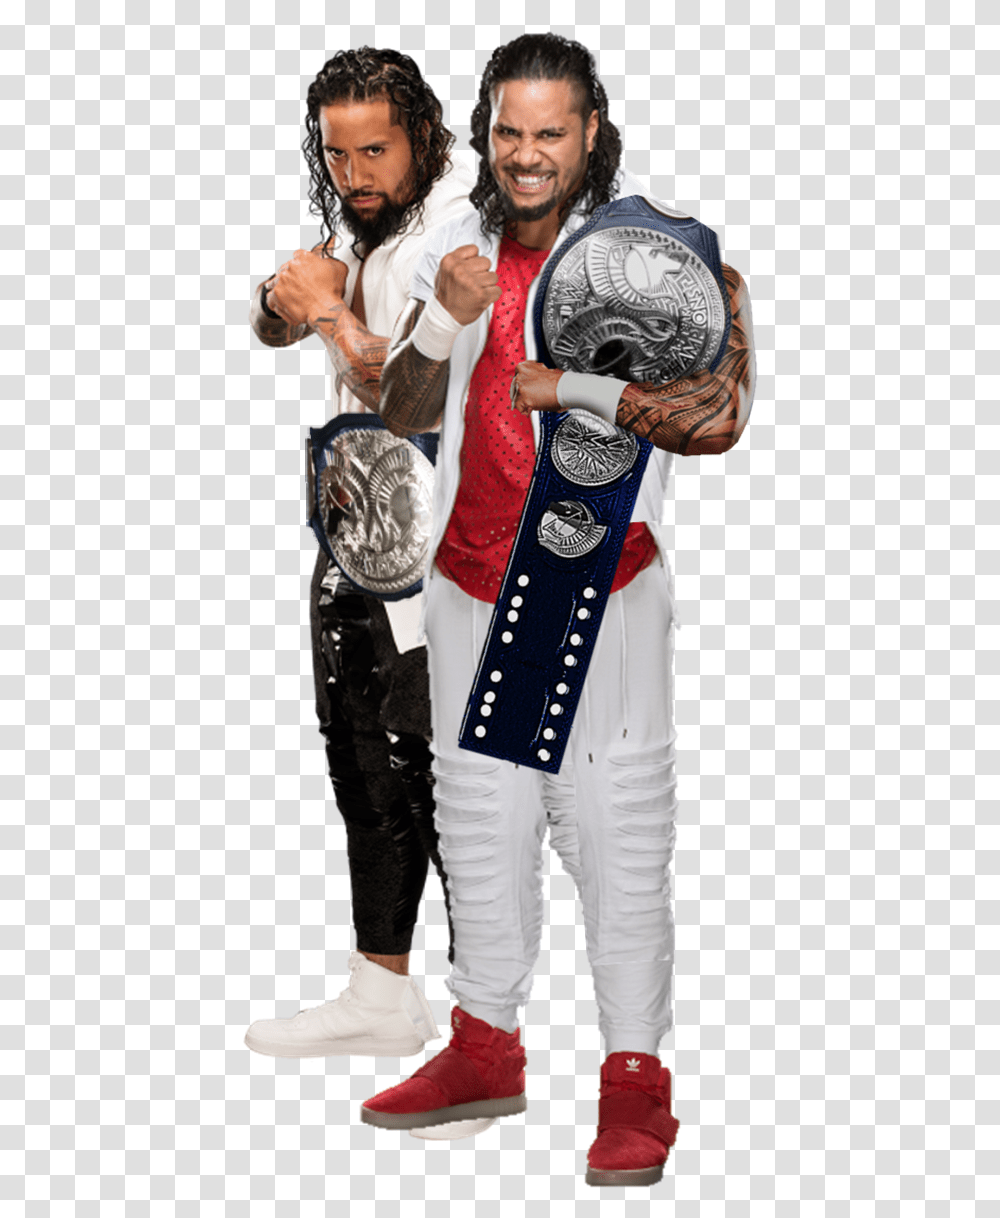 The Usos Sd Tag Team Champion 2017 By Thephenomenalseth Jimmy Uso Full Body, Skin, Person, Human, Tattoo Transparent Png